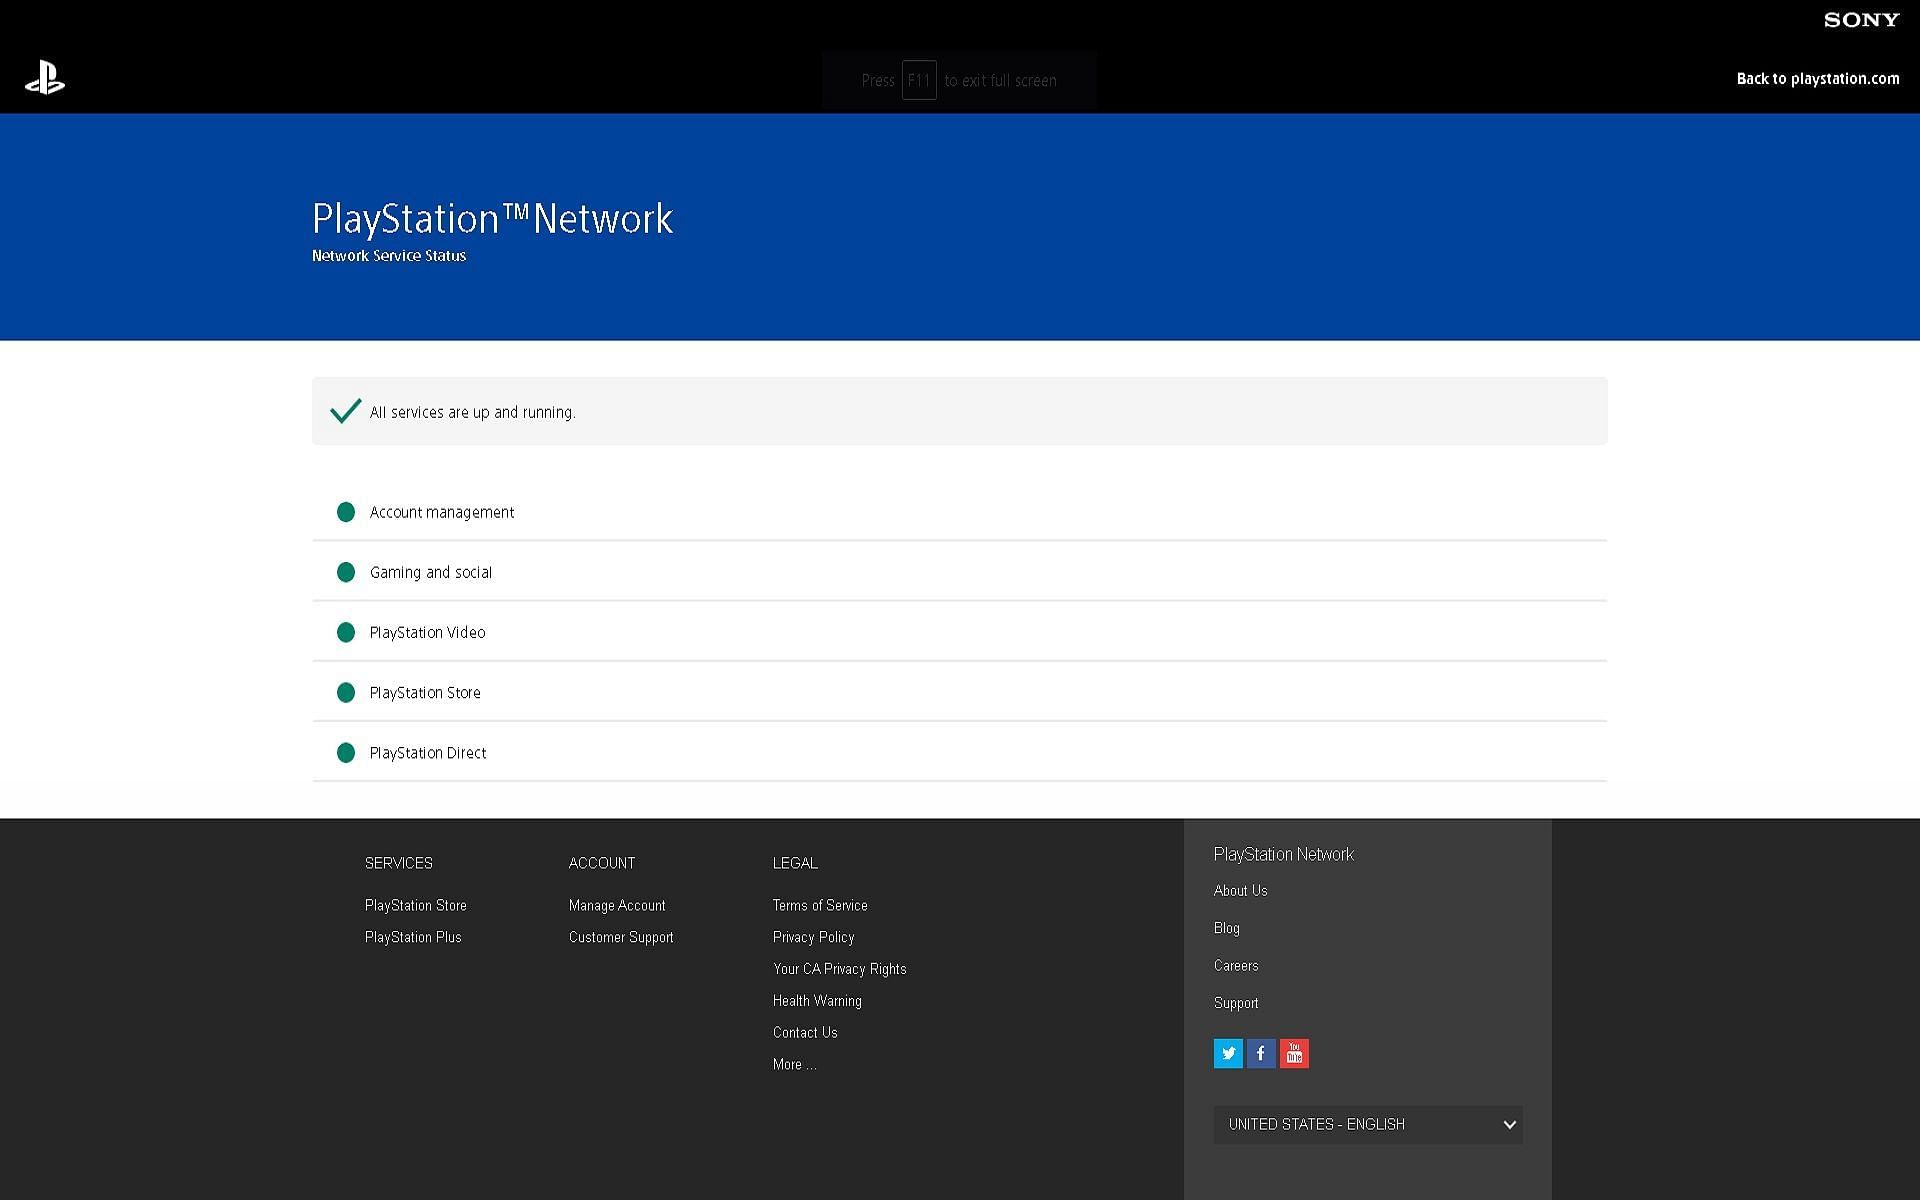 The network status for PSN (Image via Sony)